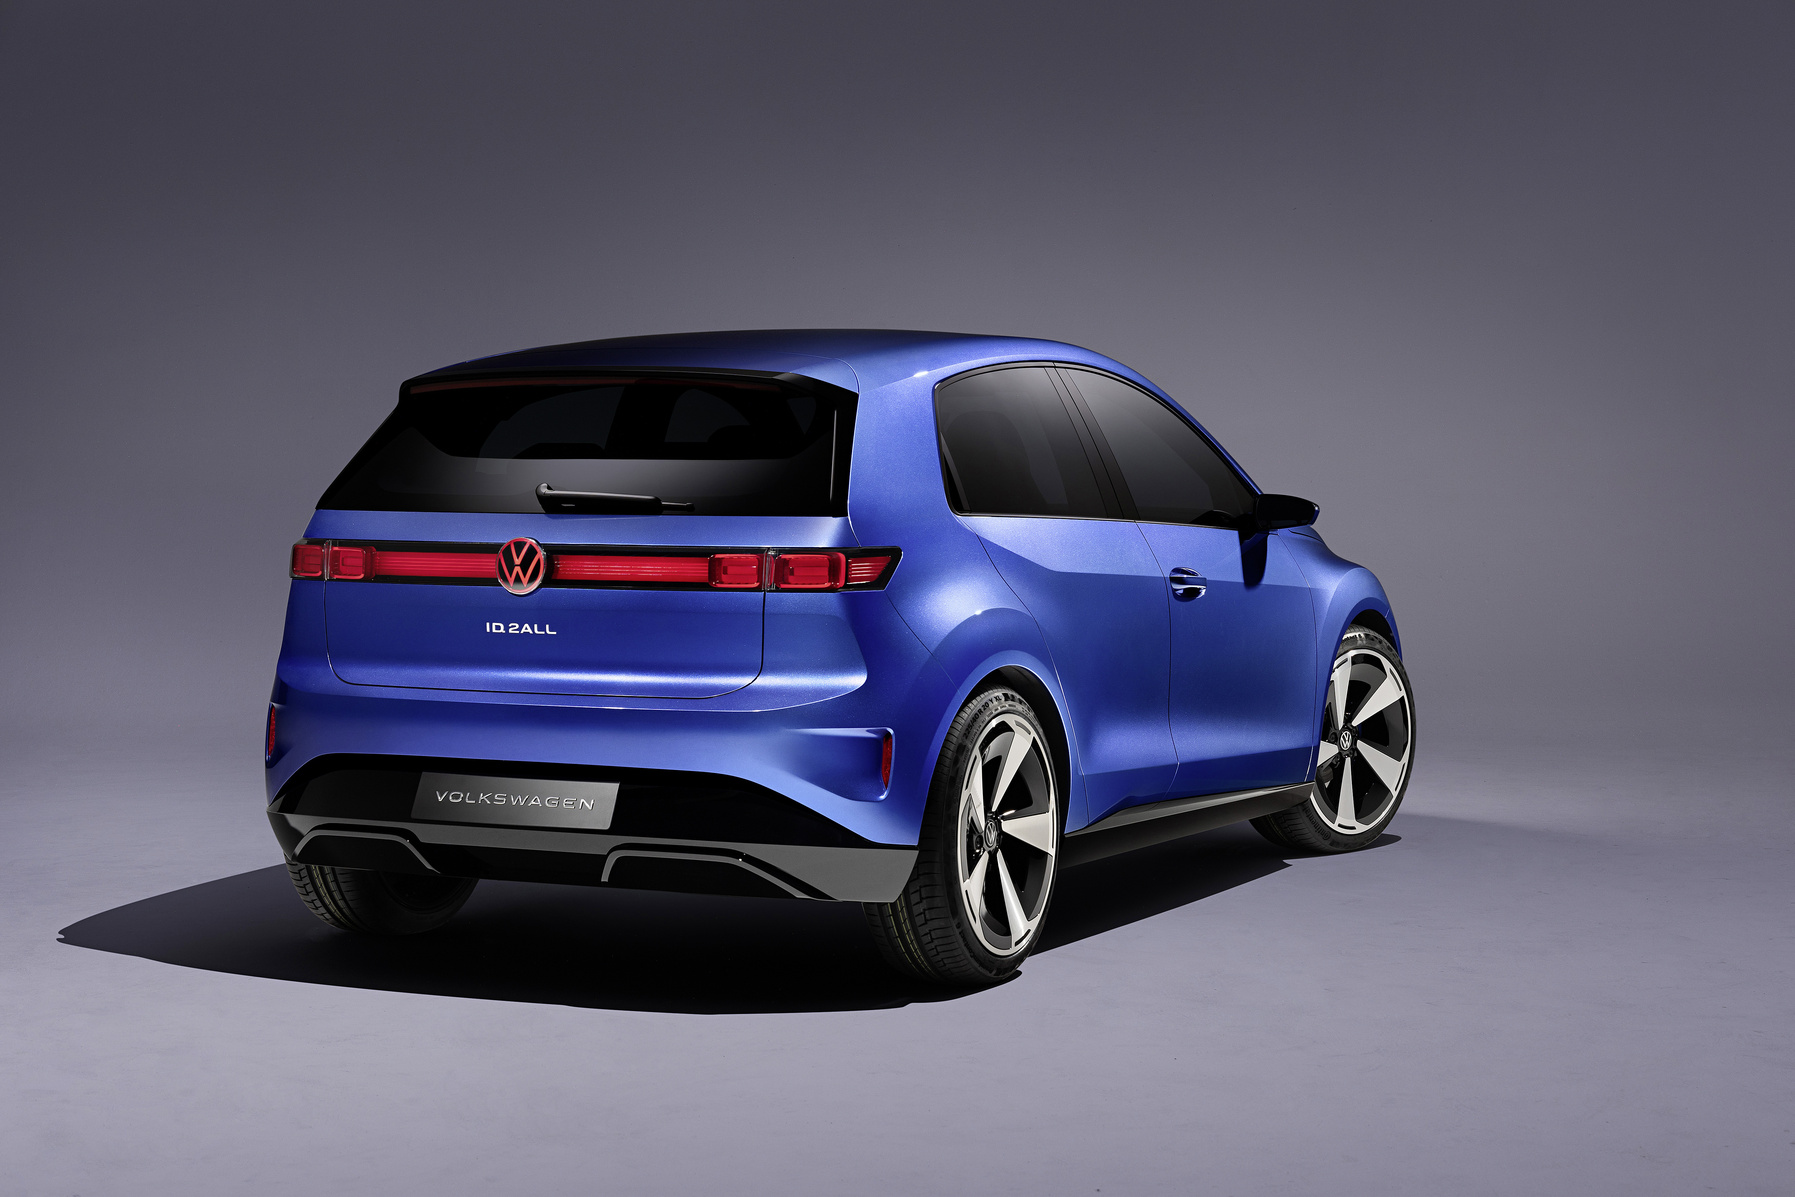 volkswagenid.2all, vw, volkswagen, electric, volkswagen, volkswagen id.2, volkswagen golf, volkswagen polo, electric, vw, volkswagen says that the id.2all has a golf-sized interior, but will be smaller than the id.3